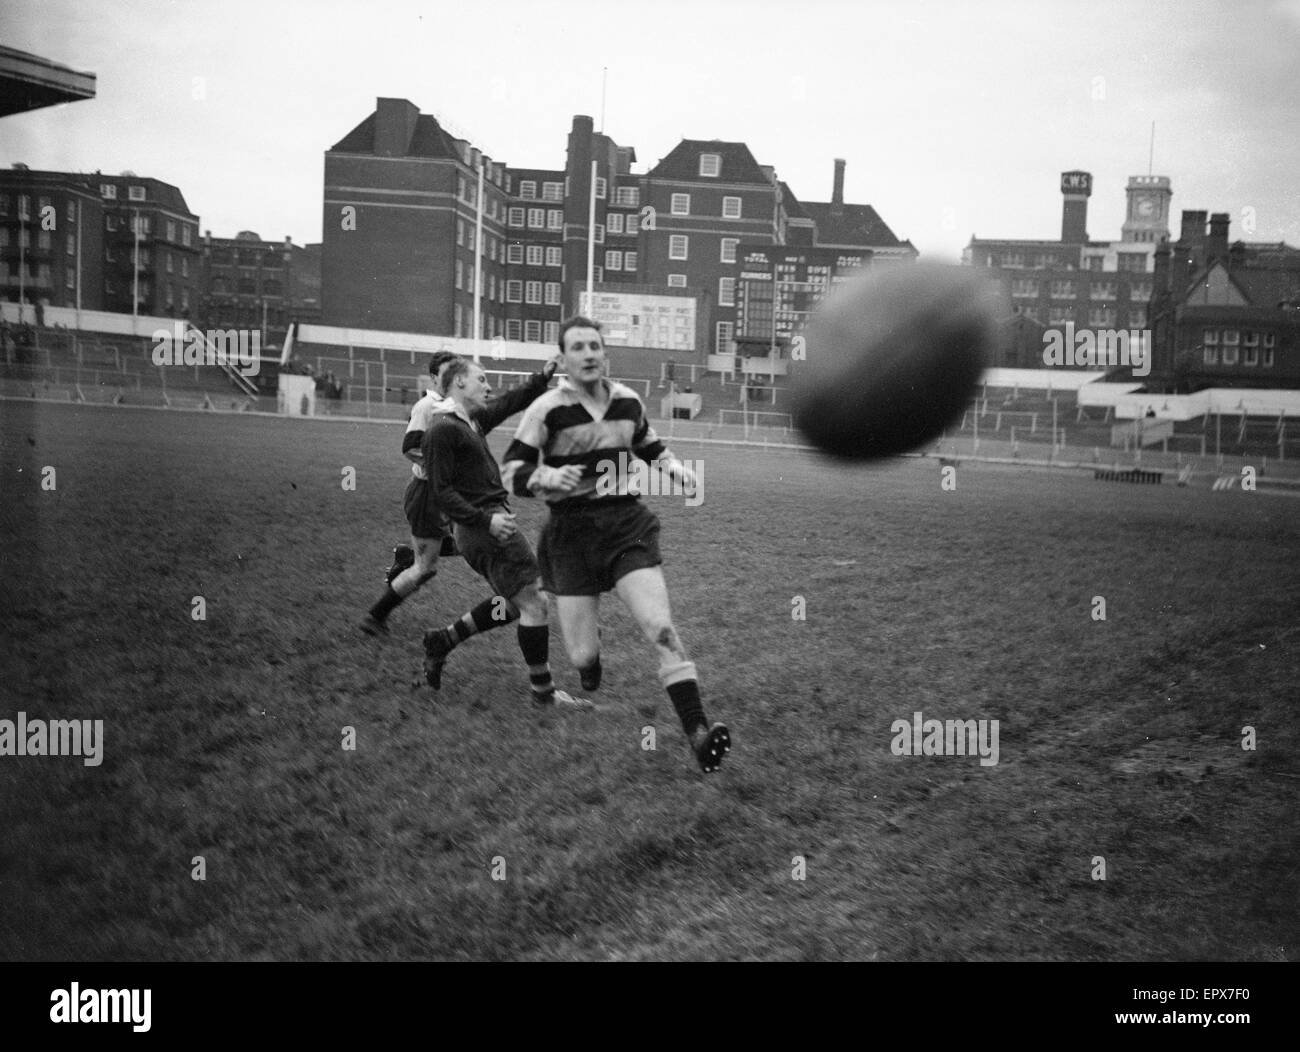 London Wasps v Cardiff Blues, Rugby Union match, dicembre 1959. Foto Stock